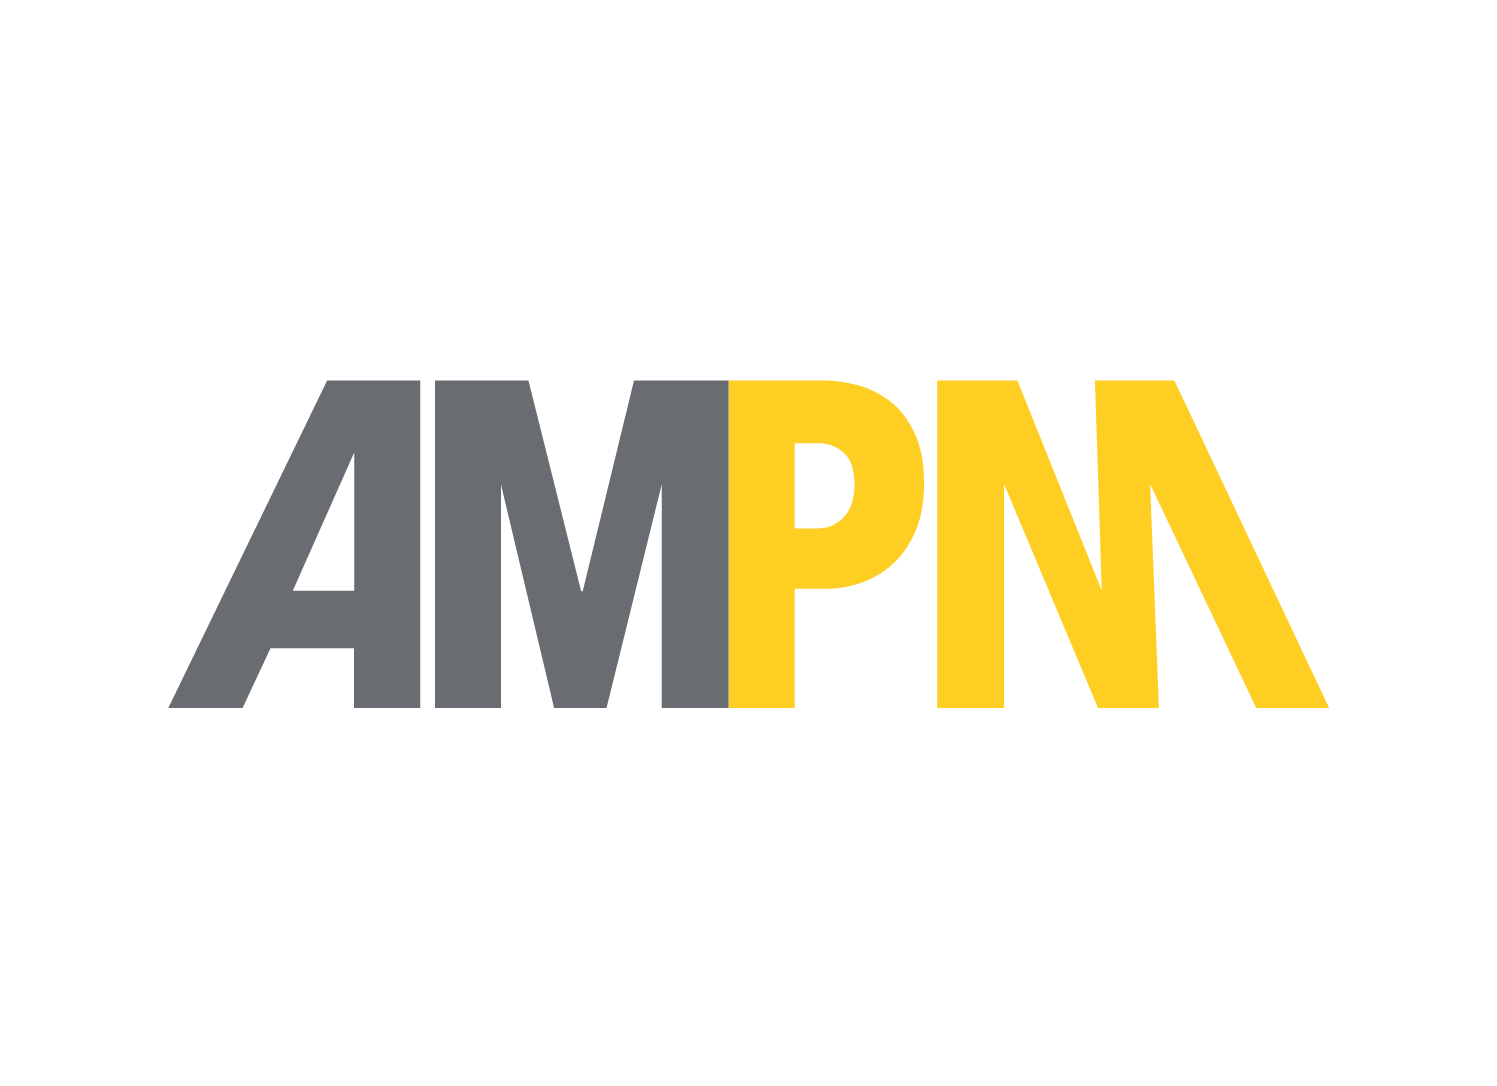 Travel & Lifestyle Services - AMPM Group